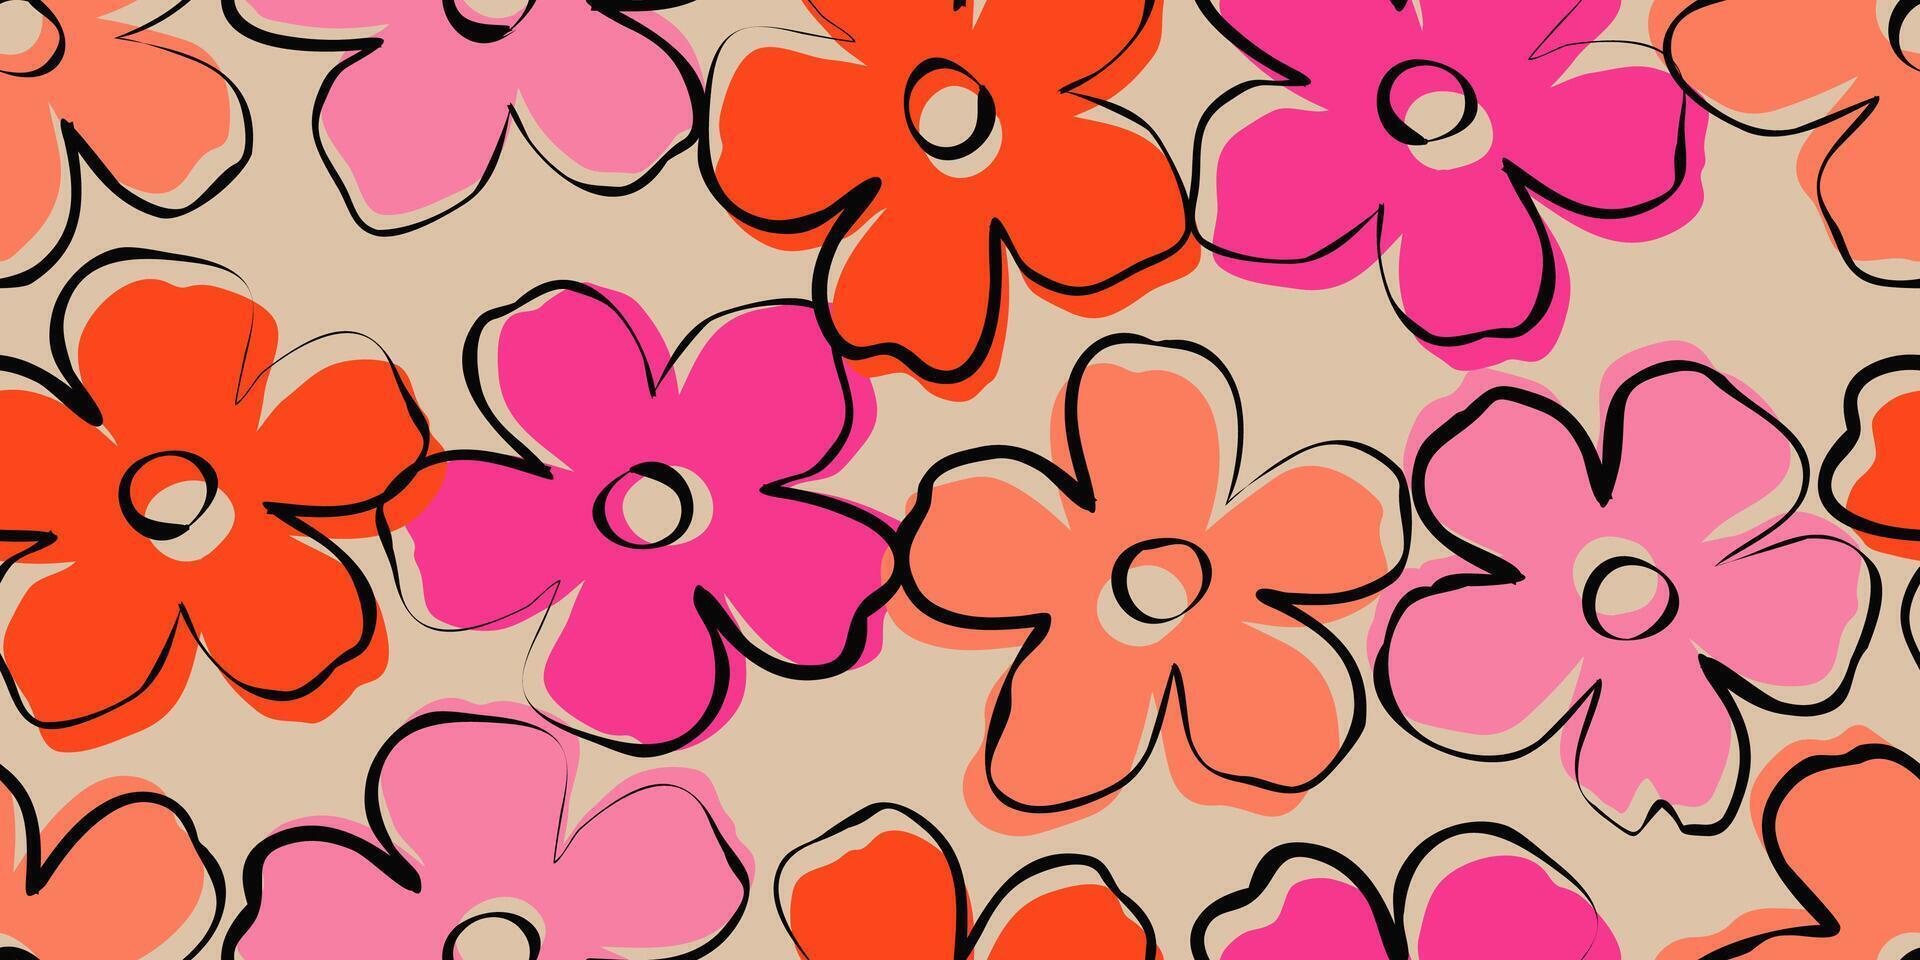 Exotic hand drawn flowers, seamless patterns with floral for fabric, textiles, clothing, wrapping paper, cover, banner, home decor, abstract backgrounds. Vector illustration.